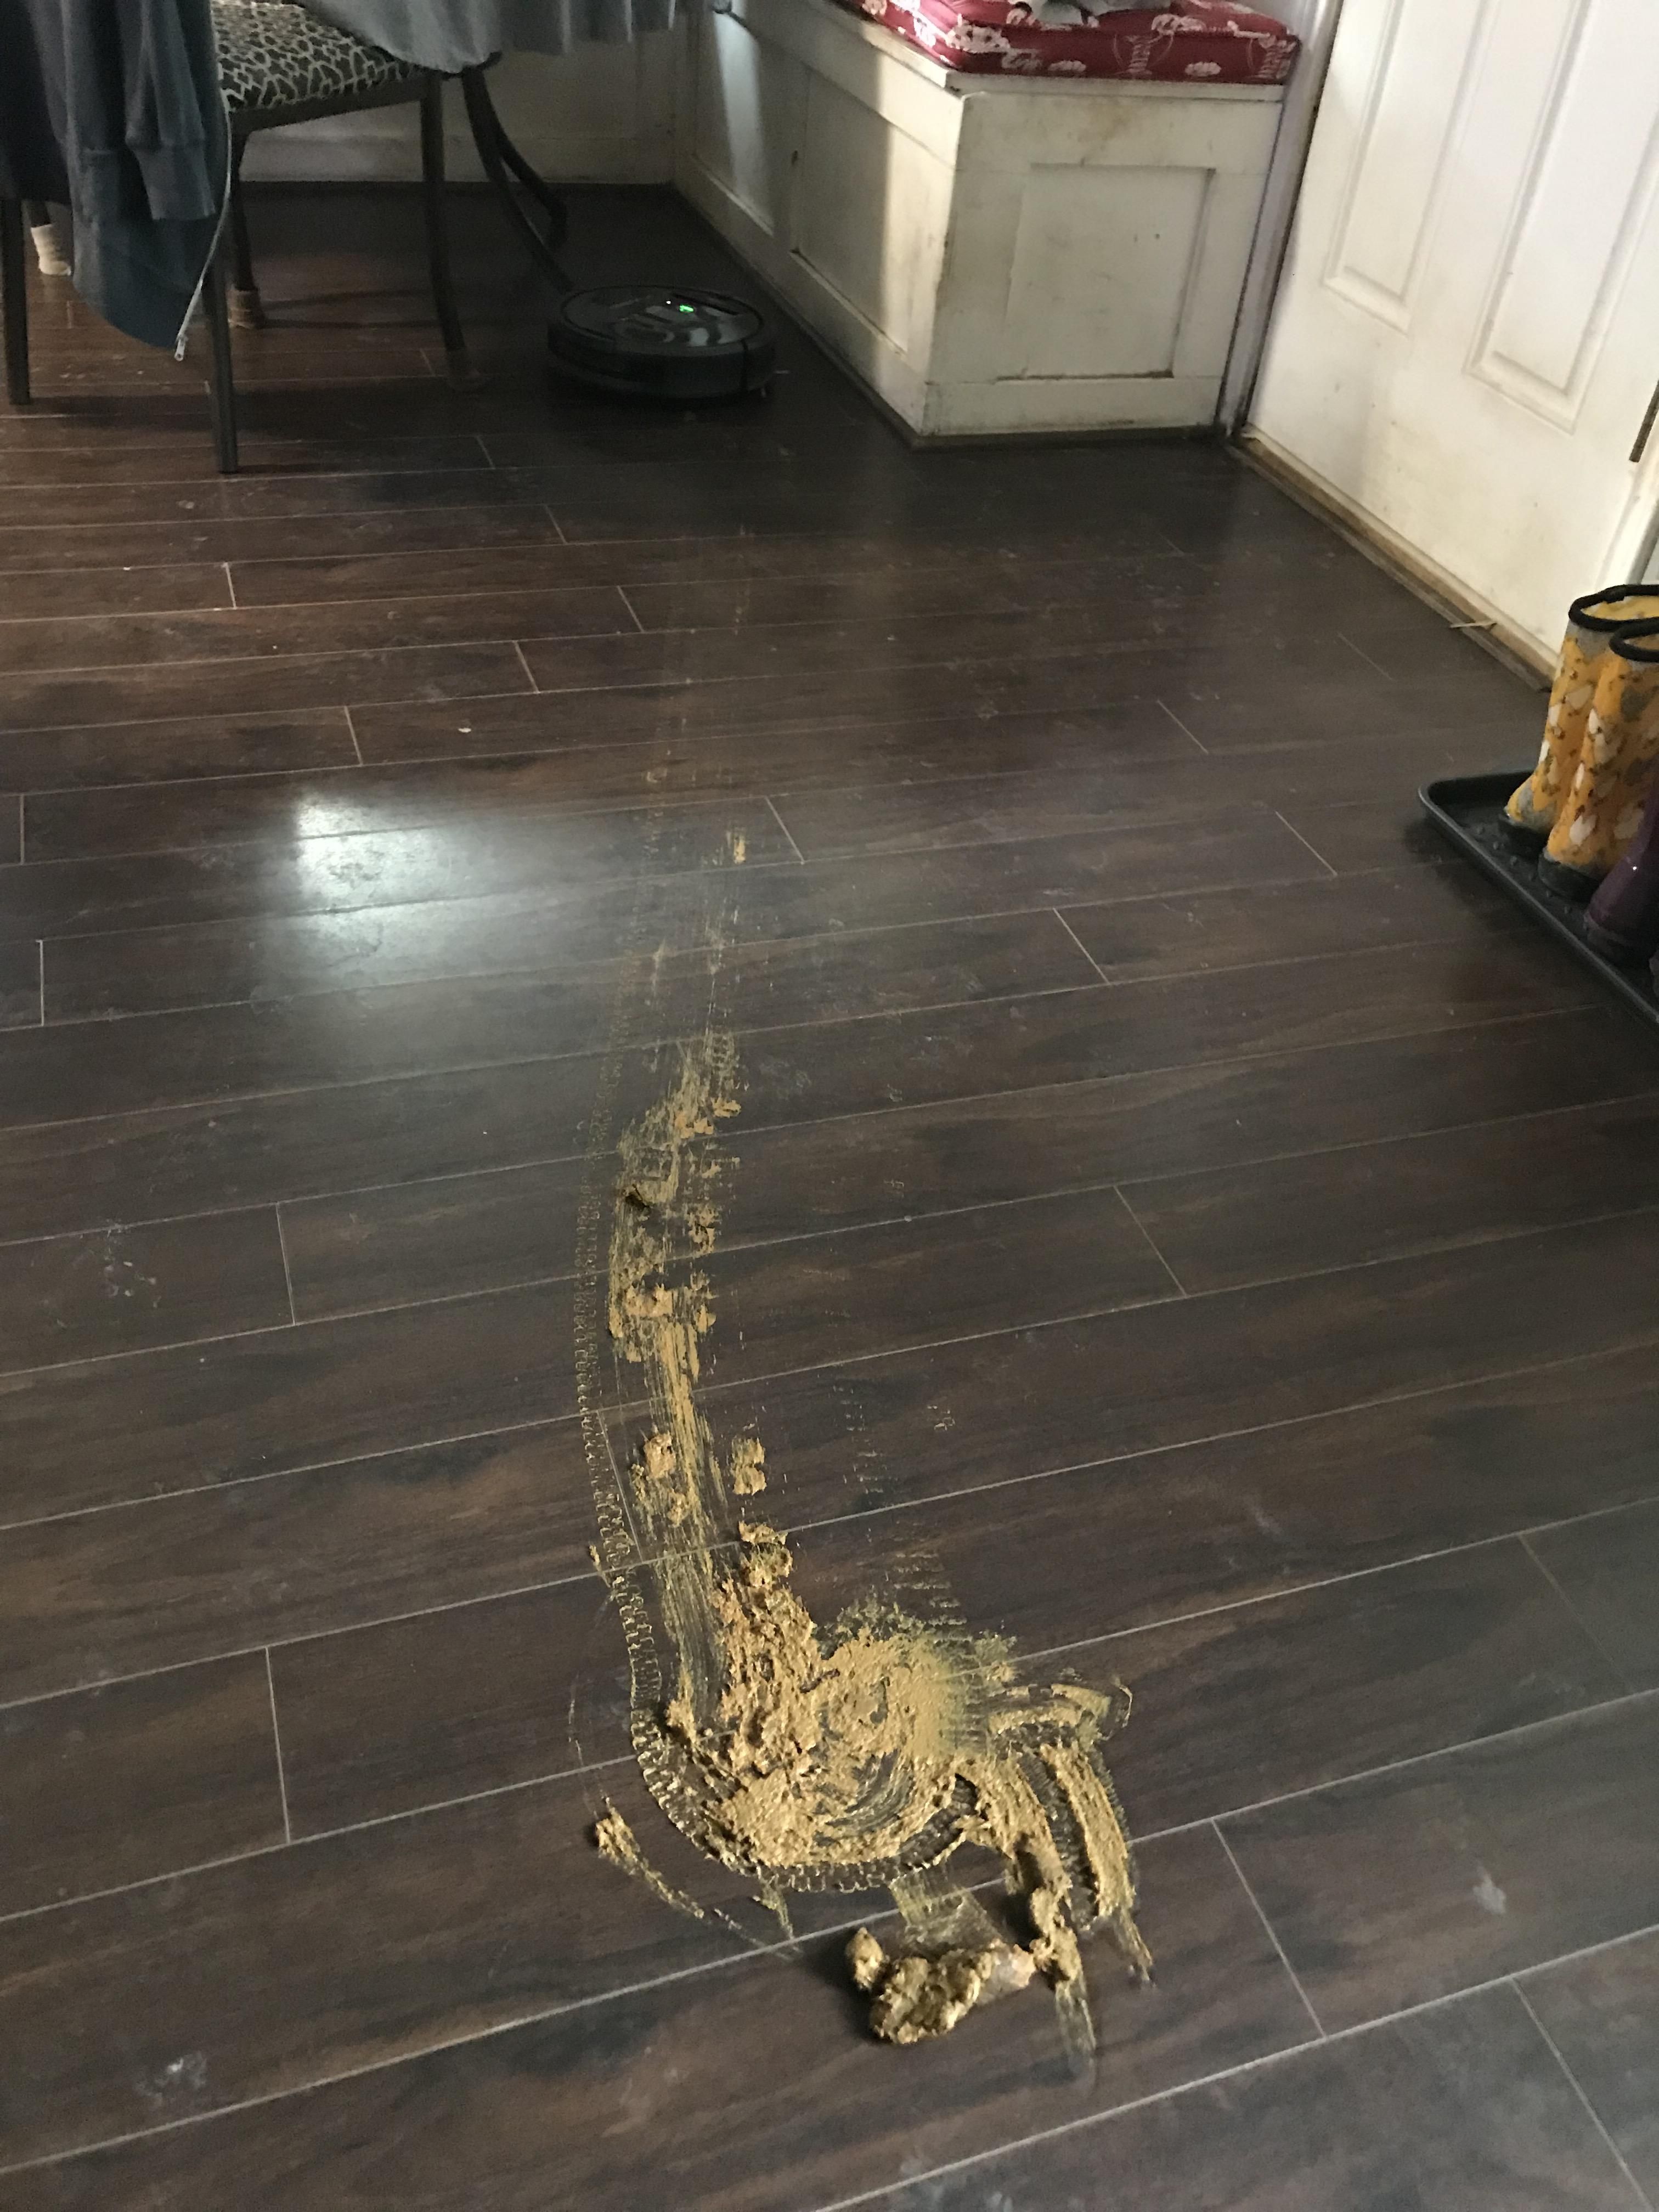 Don’t let your dog be in the same room as your robot vacuum unsupervised